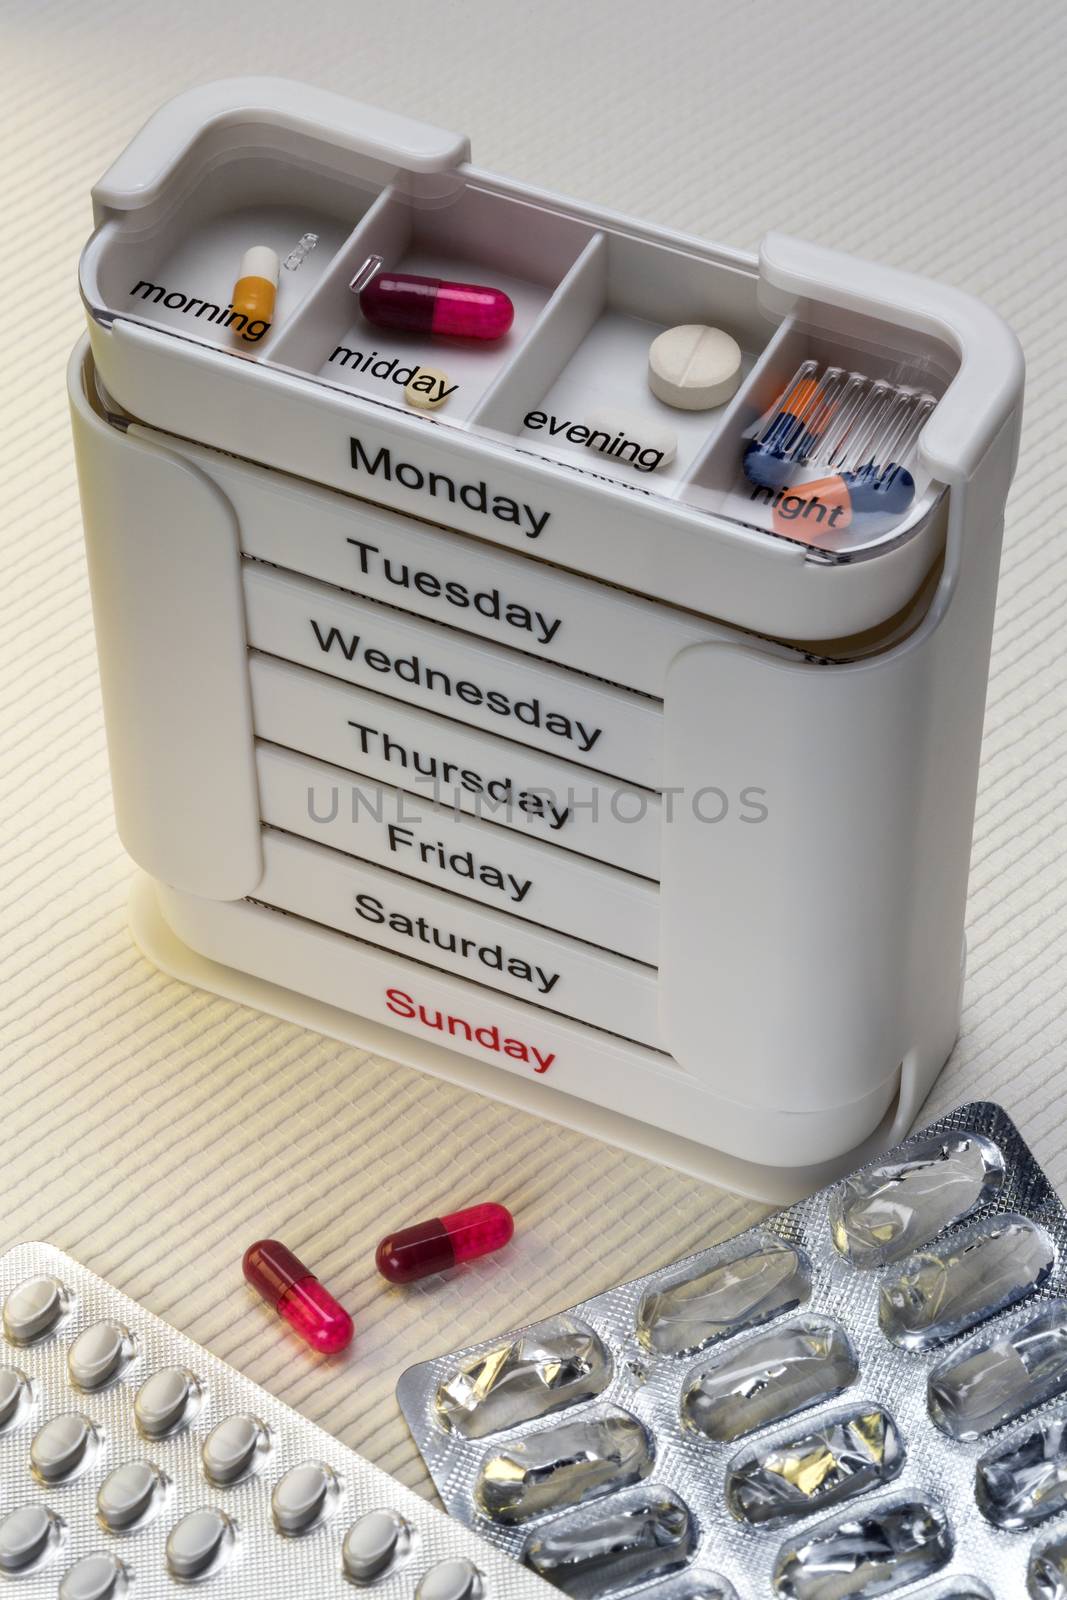 Medical Treatment - Daily drugs to be taken in the morning, midday, evening and at night.